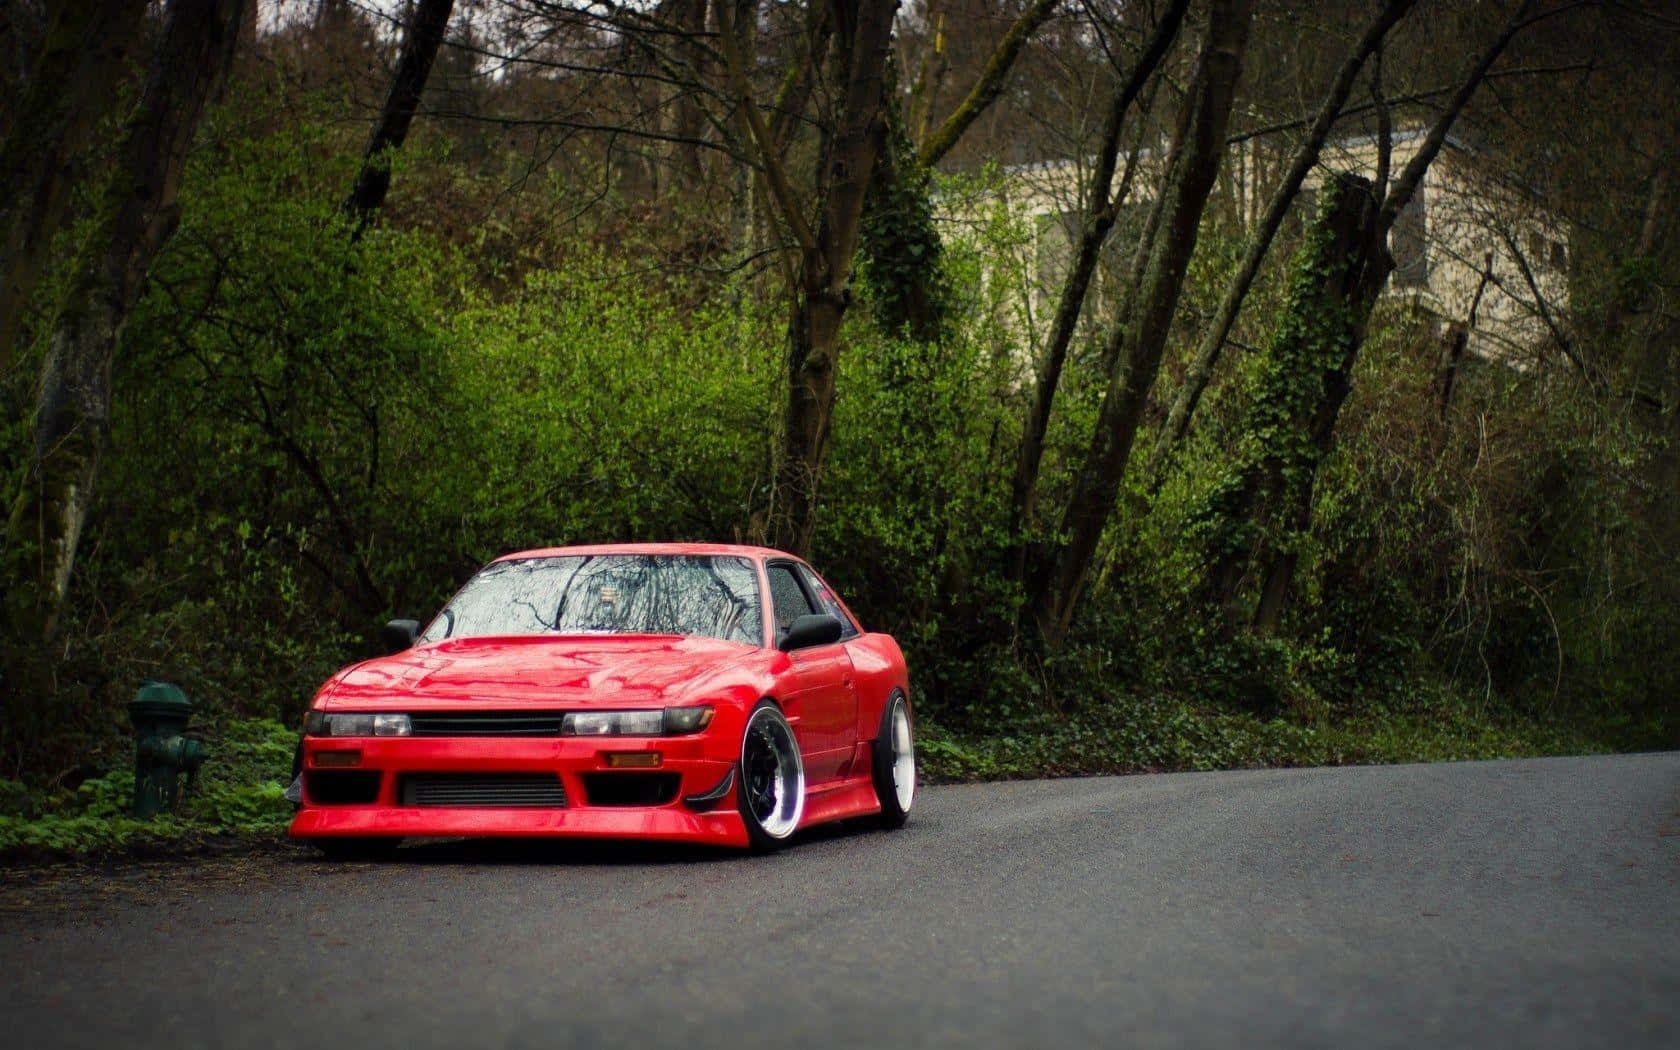 Nissan 180 Sx In The Woods Wallpaper